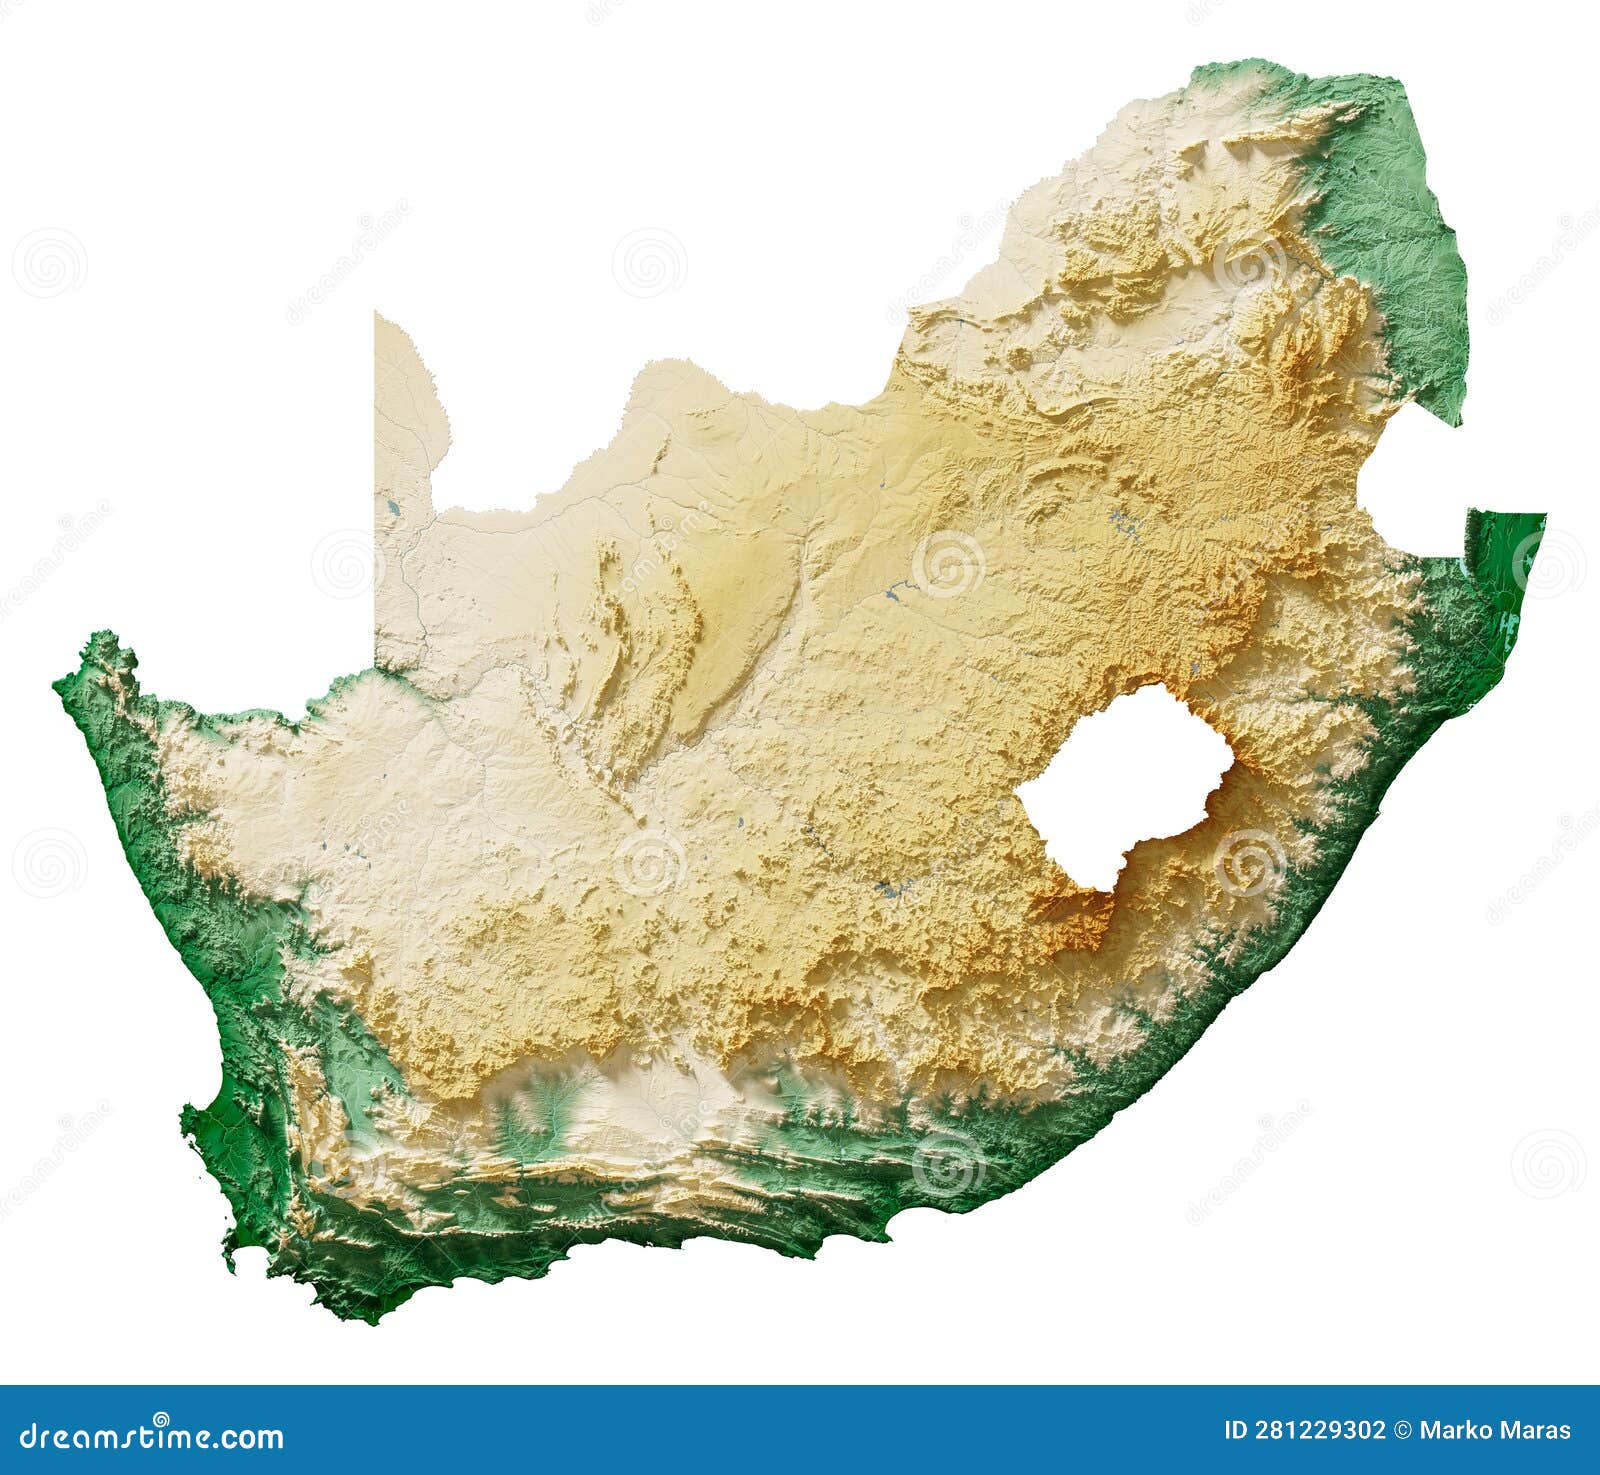 south africa relief map